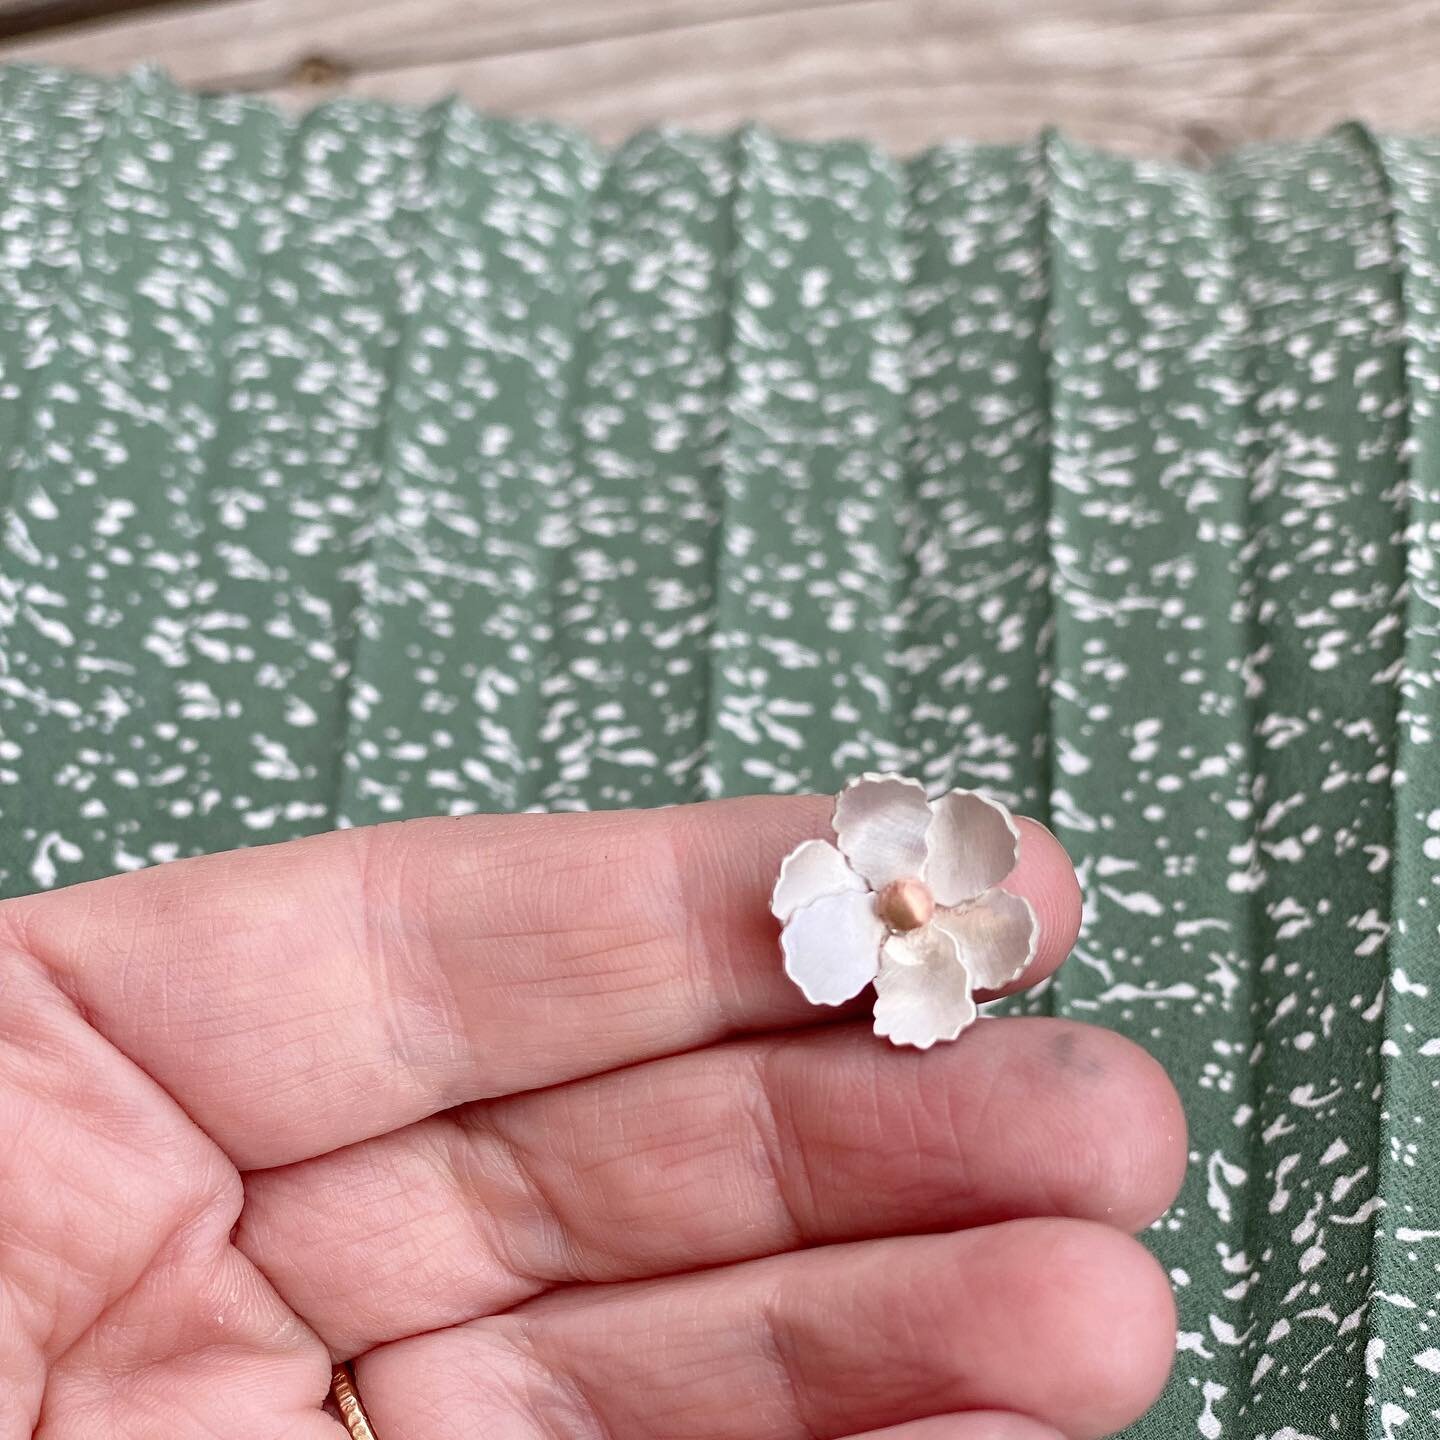 Just a little flower I made today that I&rsquo;m loving. Some days I just let myself play in the studio with no intentions of doing anything but letting creativity flow.
Do you think this should be a necklace or should I make another one for a pair o